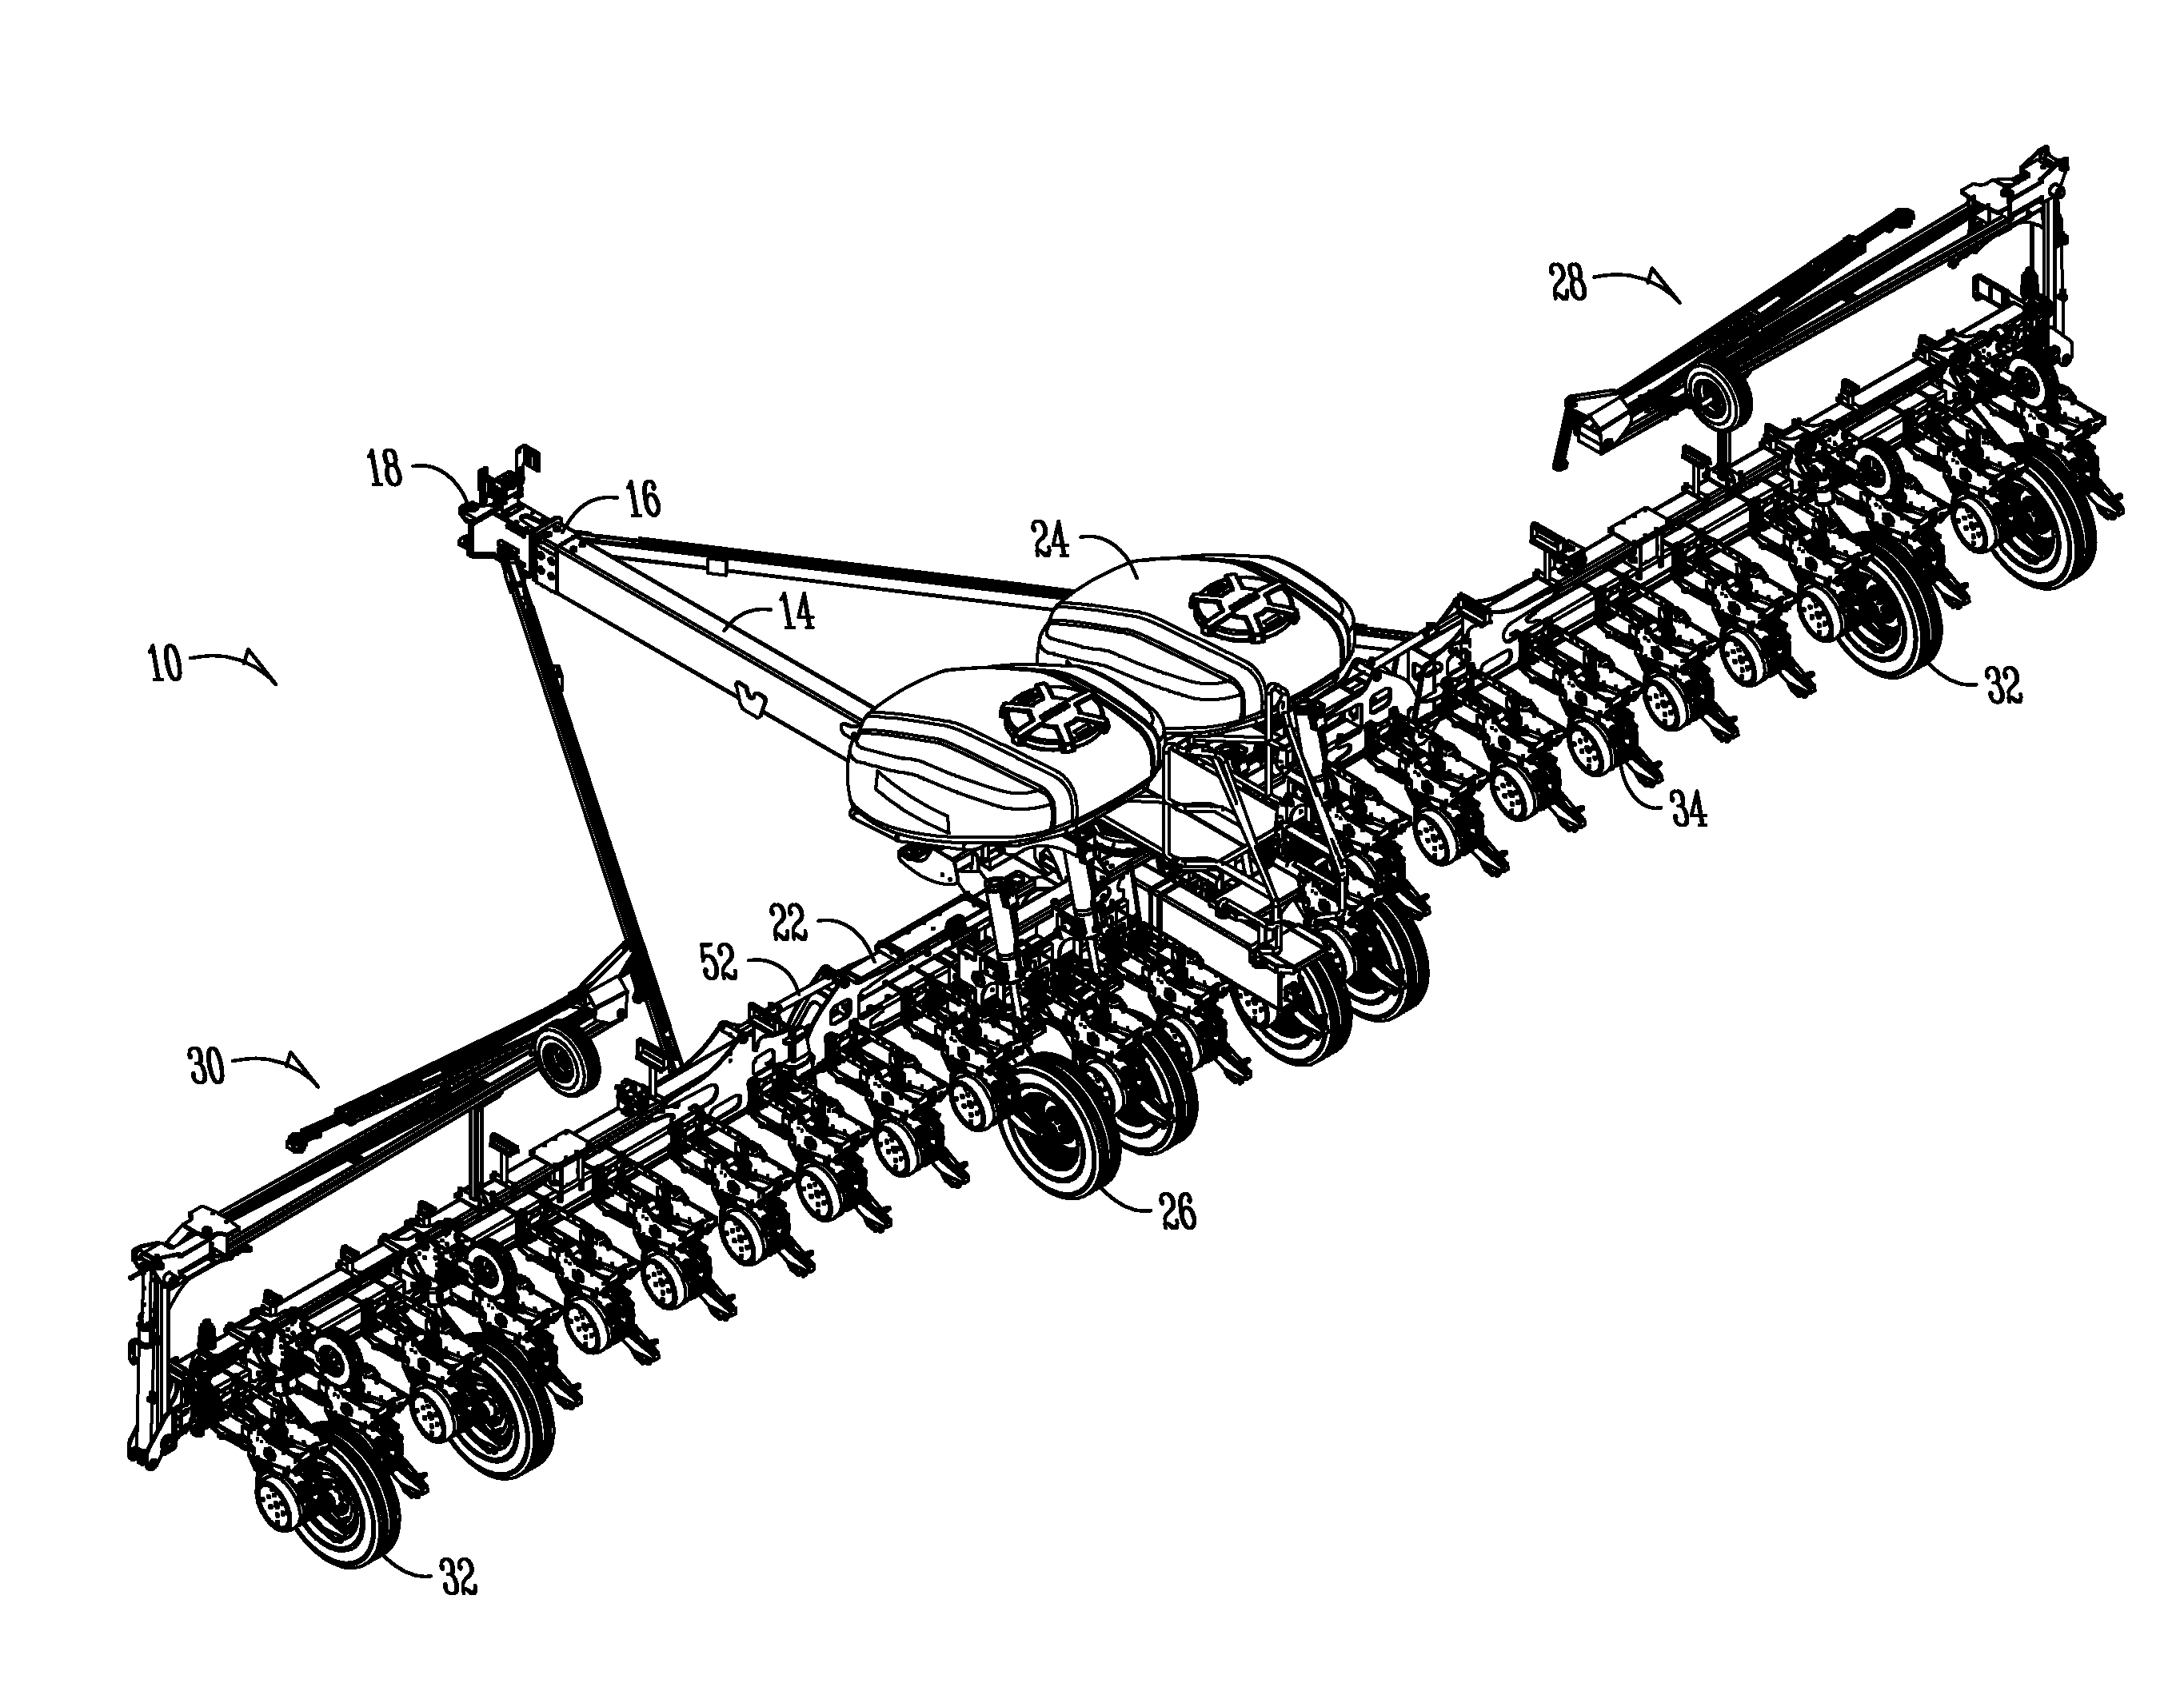 Weight distribution system for seed planters and product applicators